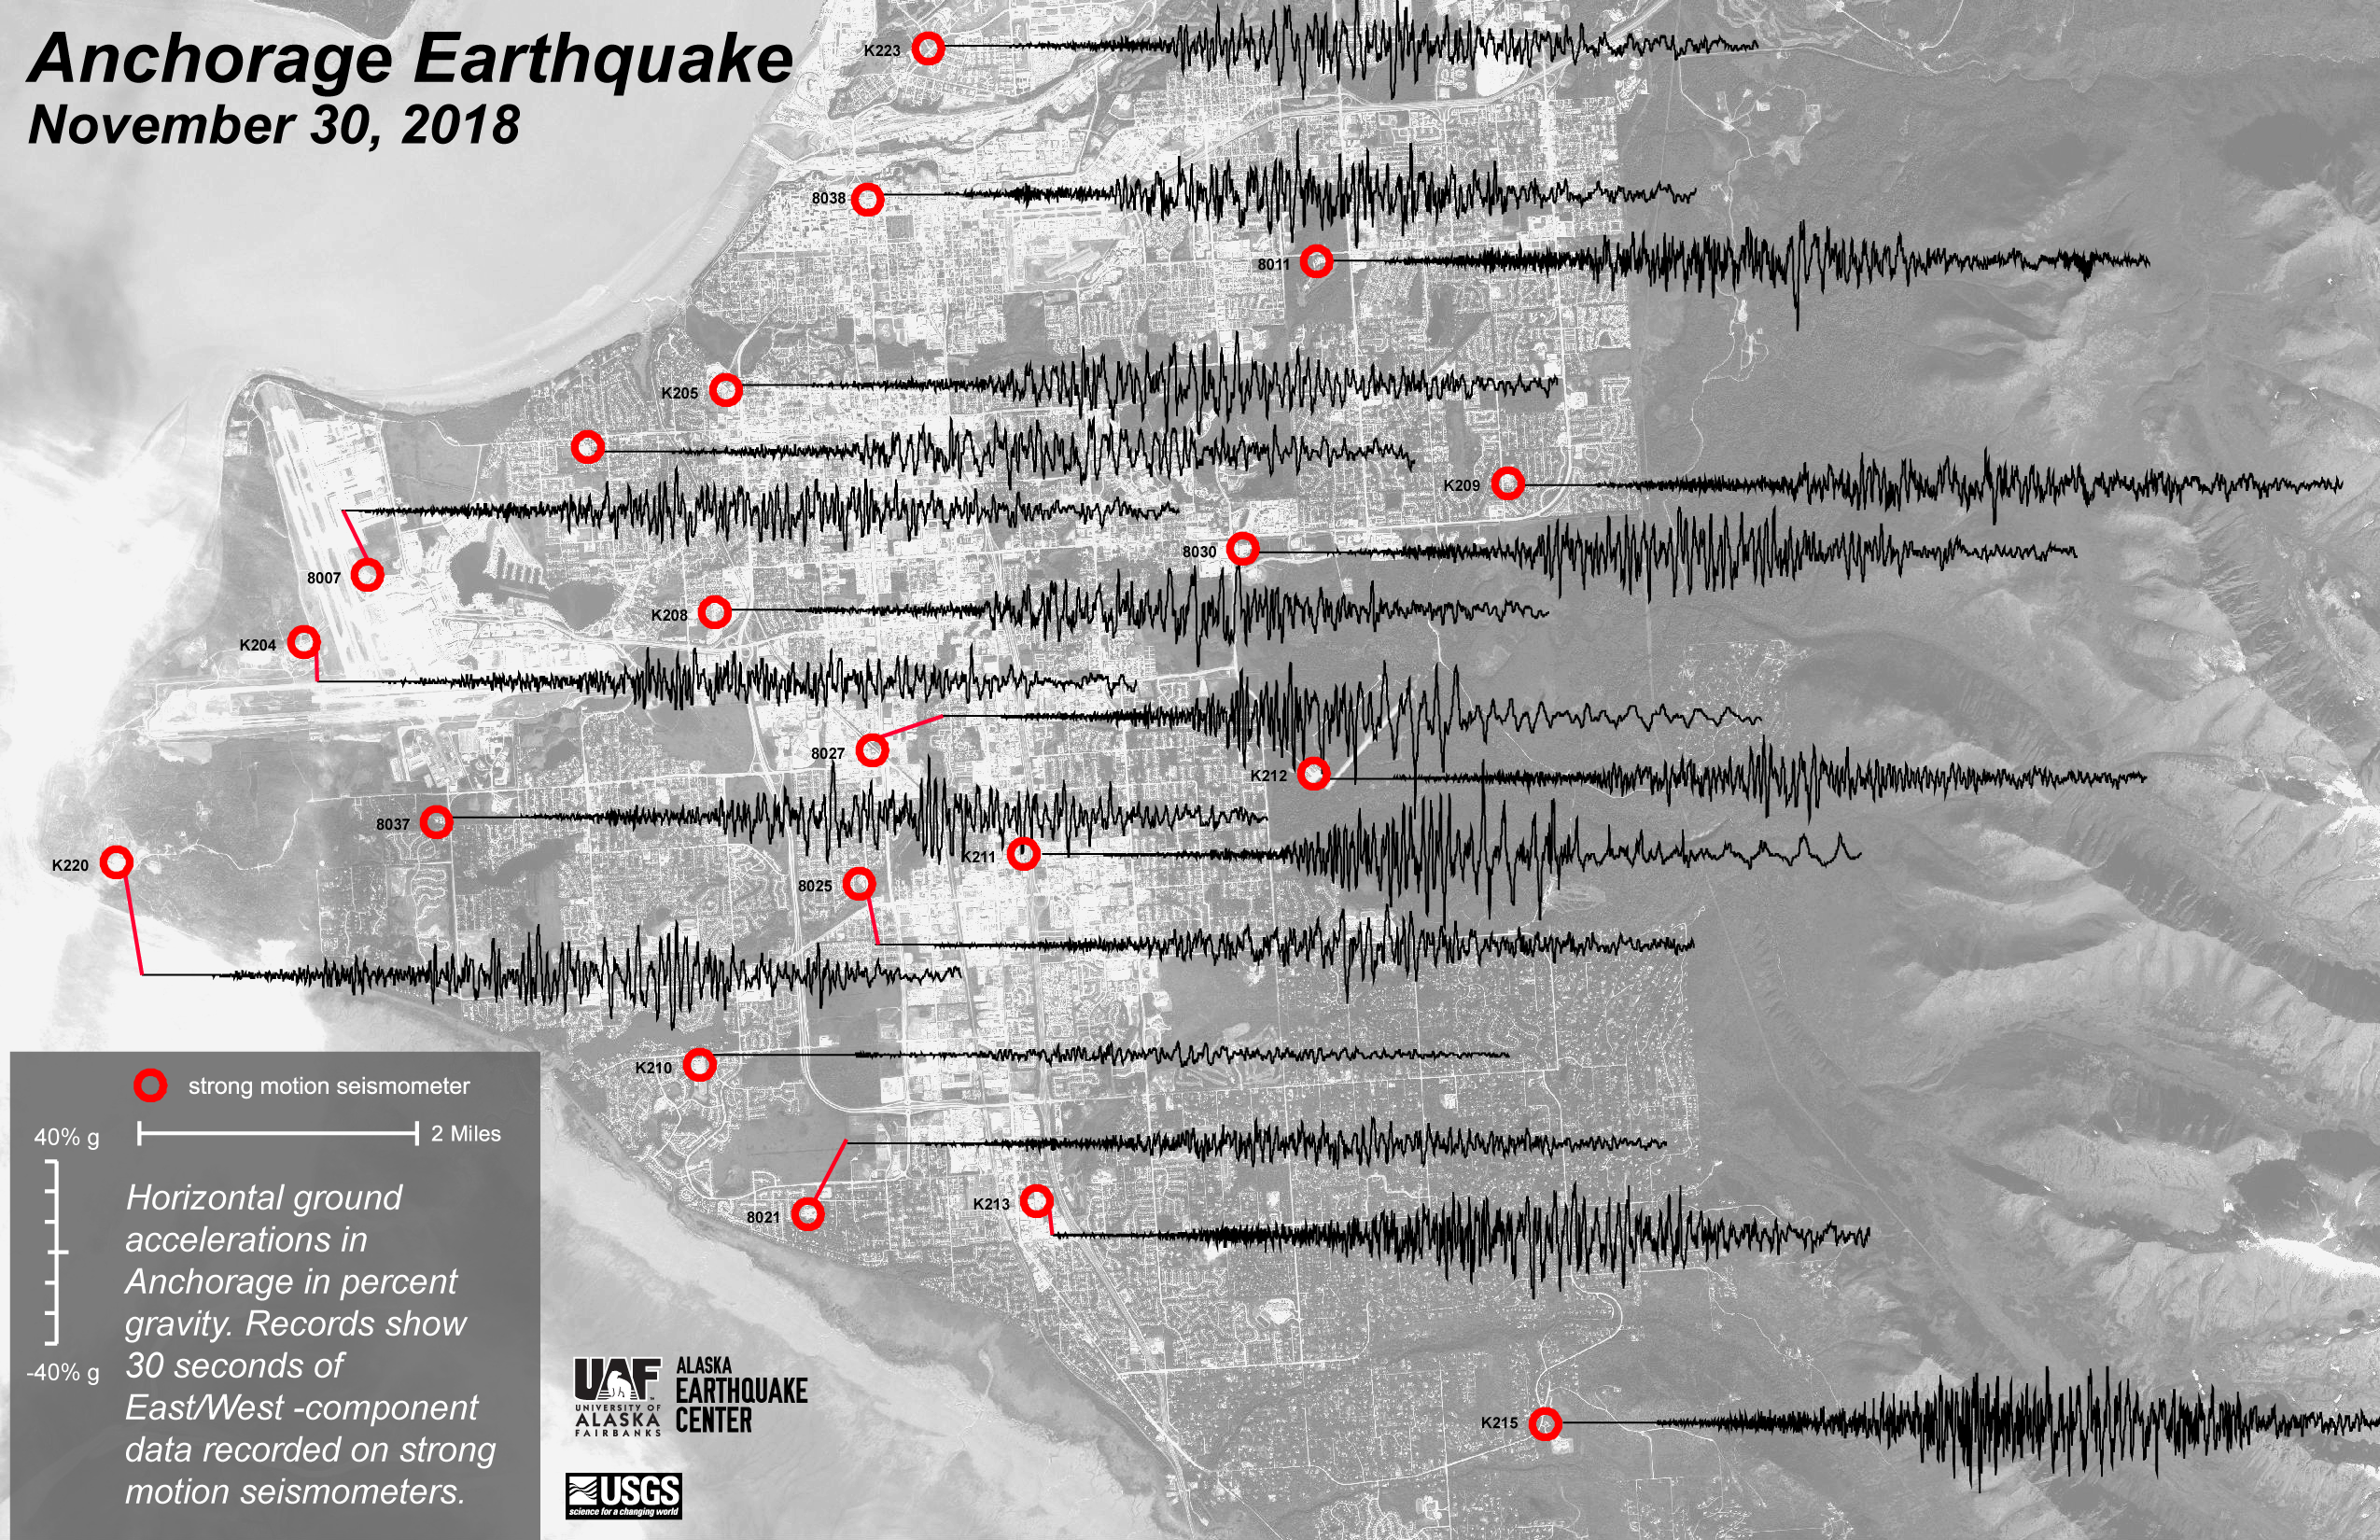 Map of Anchorage area showing stong motion seismograms at different locations for magnitude 7.1 earthquake